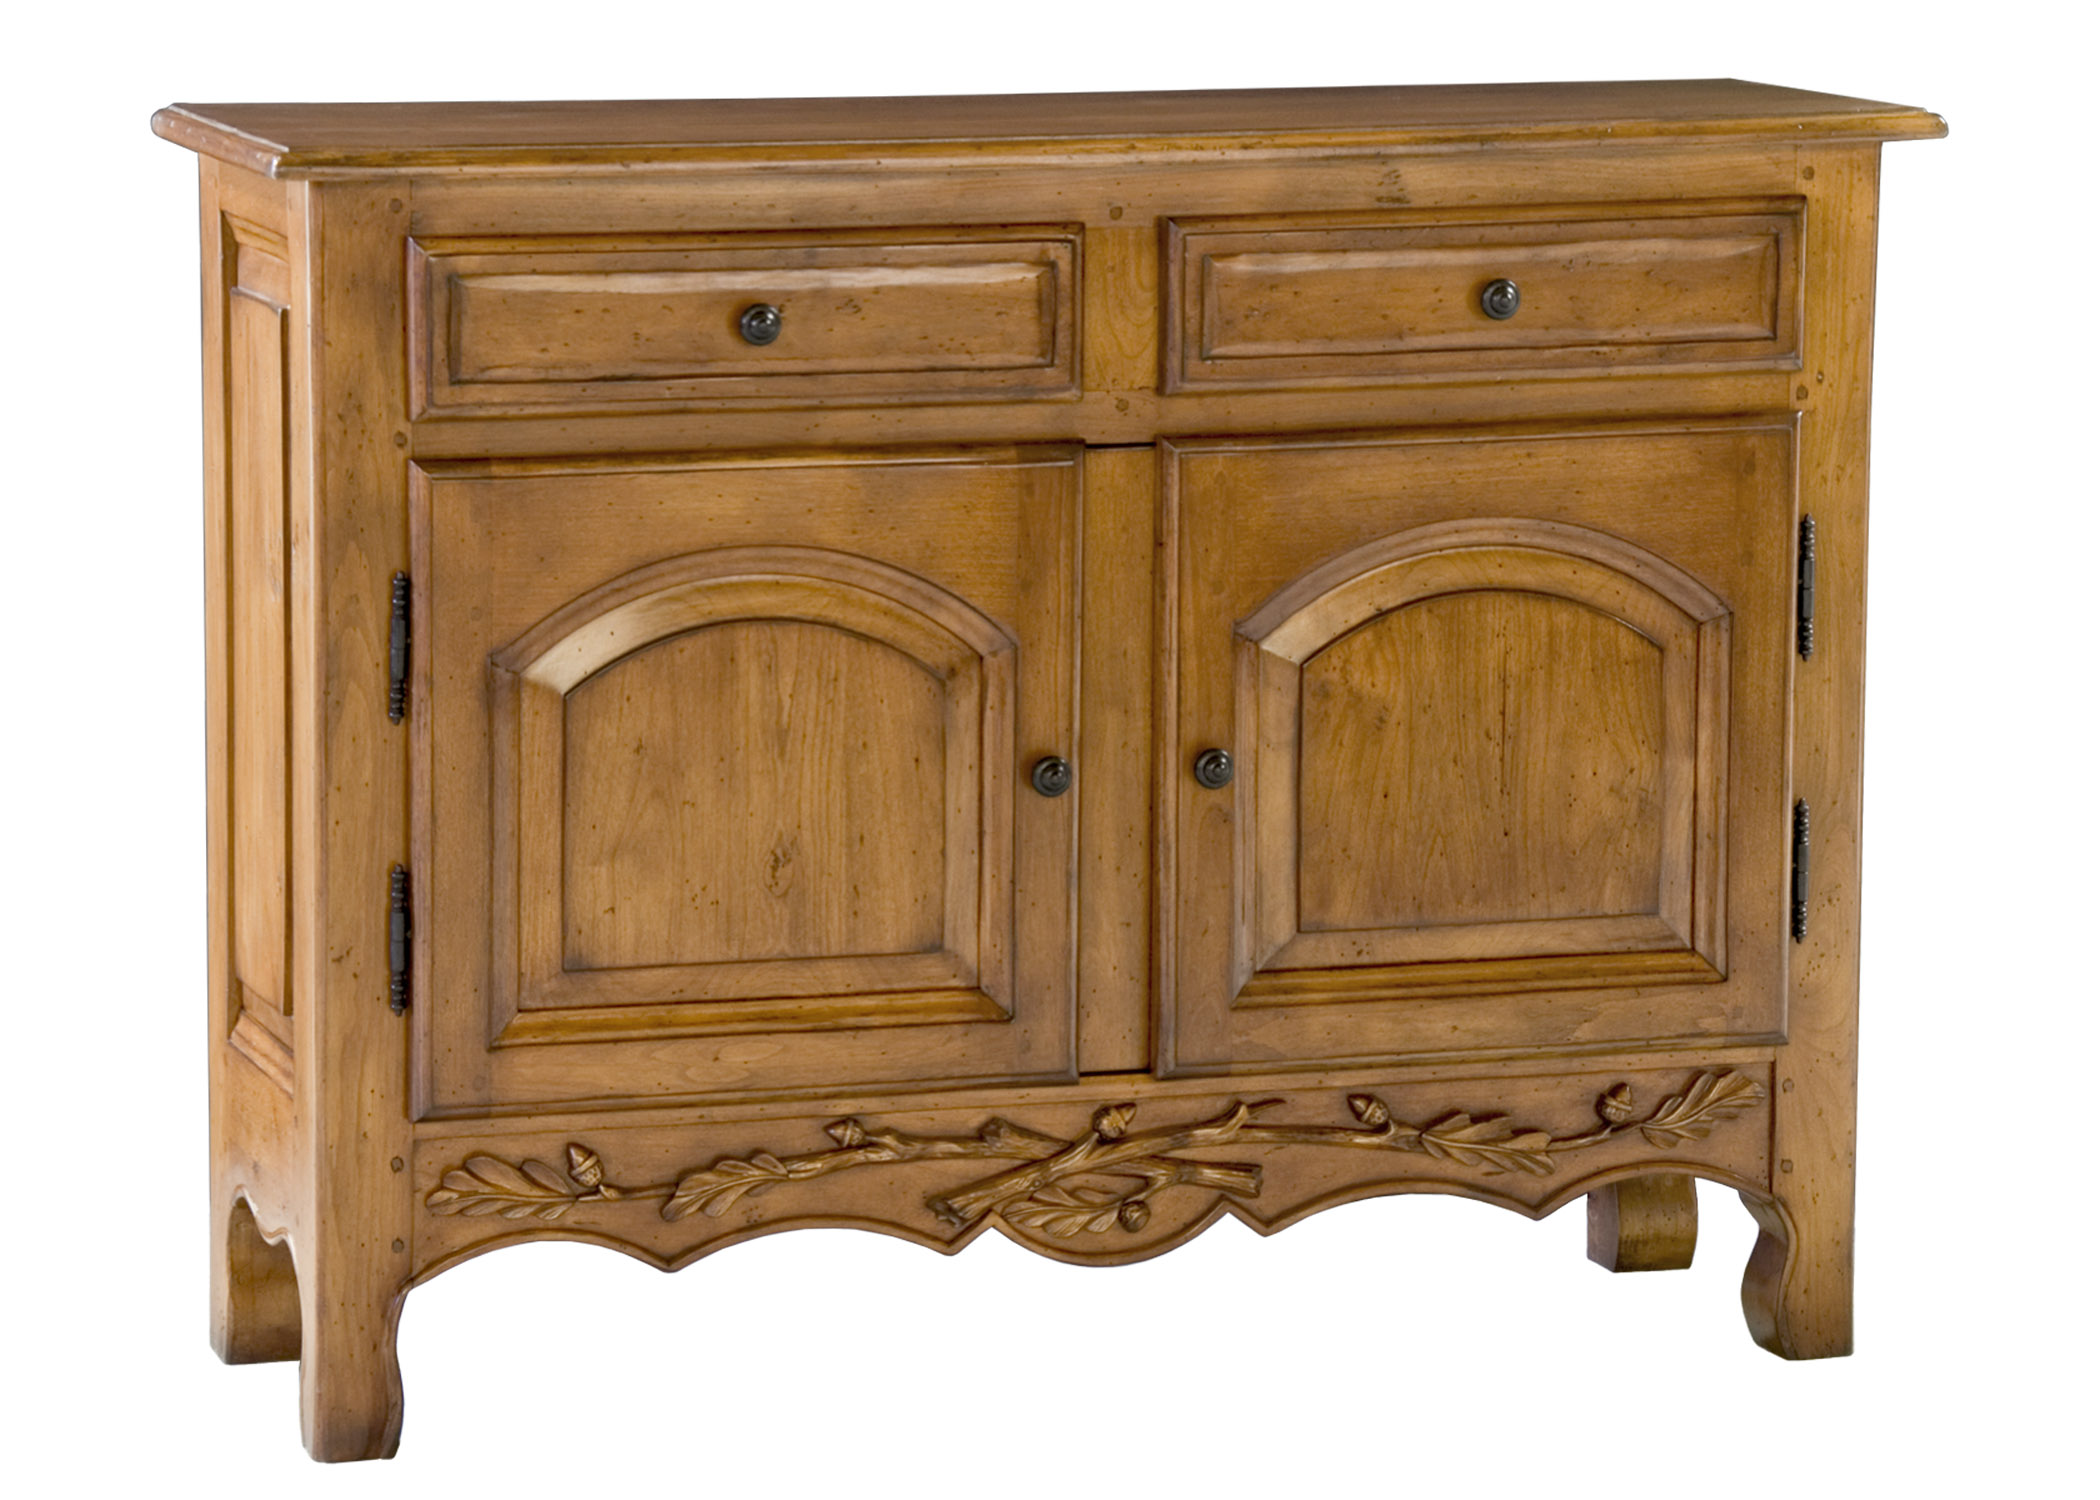 Lussac traditional sideboard cabinet with carved acorn detail on bottom apron by Woodland furniture in Idaho Falls USA